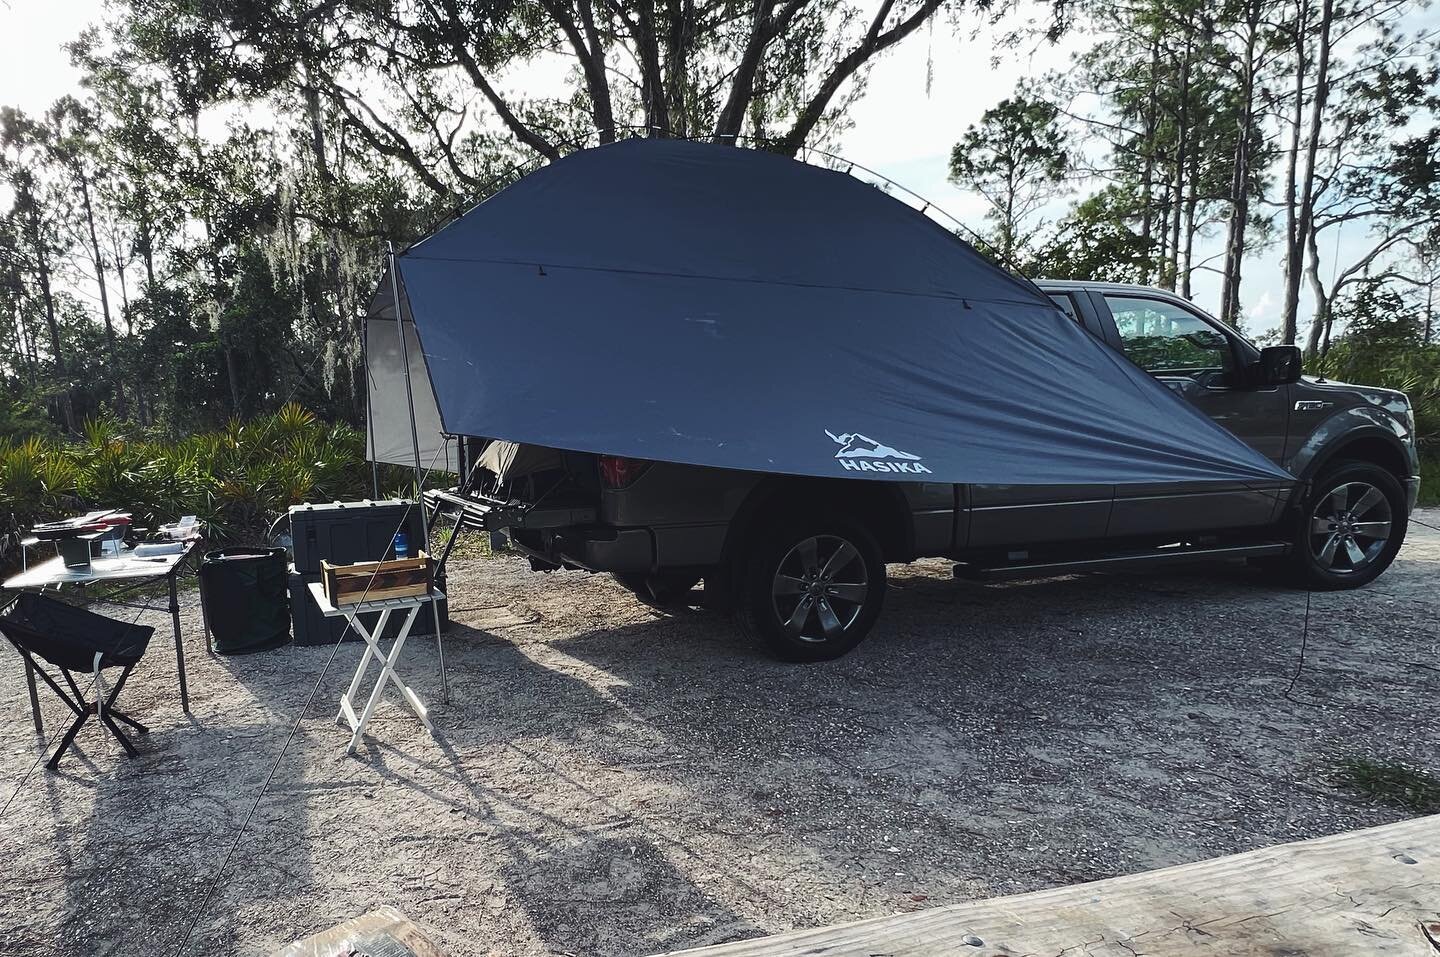 Prepping my Ford F150 for overlanding has been fun. Still plenty more to learn. I think I&rsquo;m 89% to self sufficient before any truck mods. Just completed the final test run at Lake Manatee, and the truck handled like a champ! Now, gearing up for